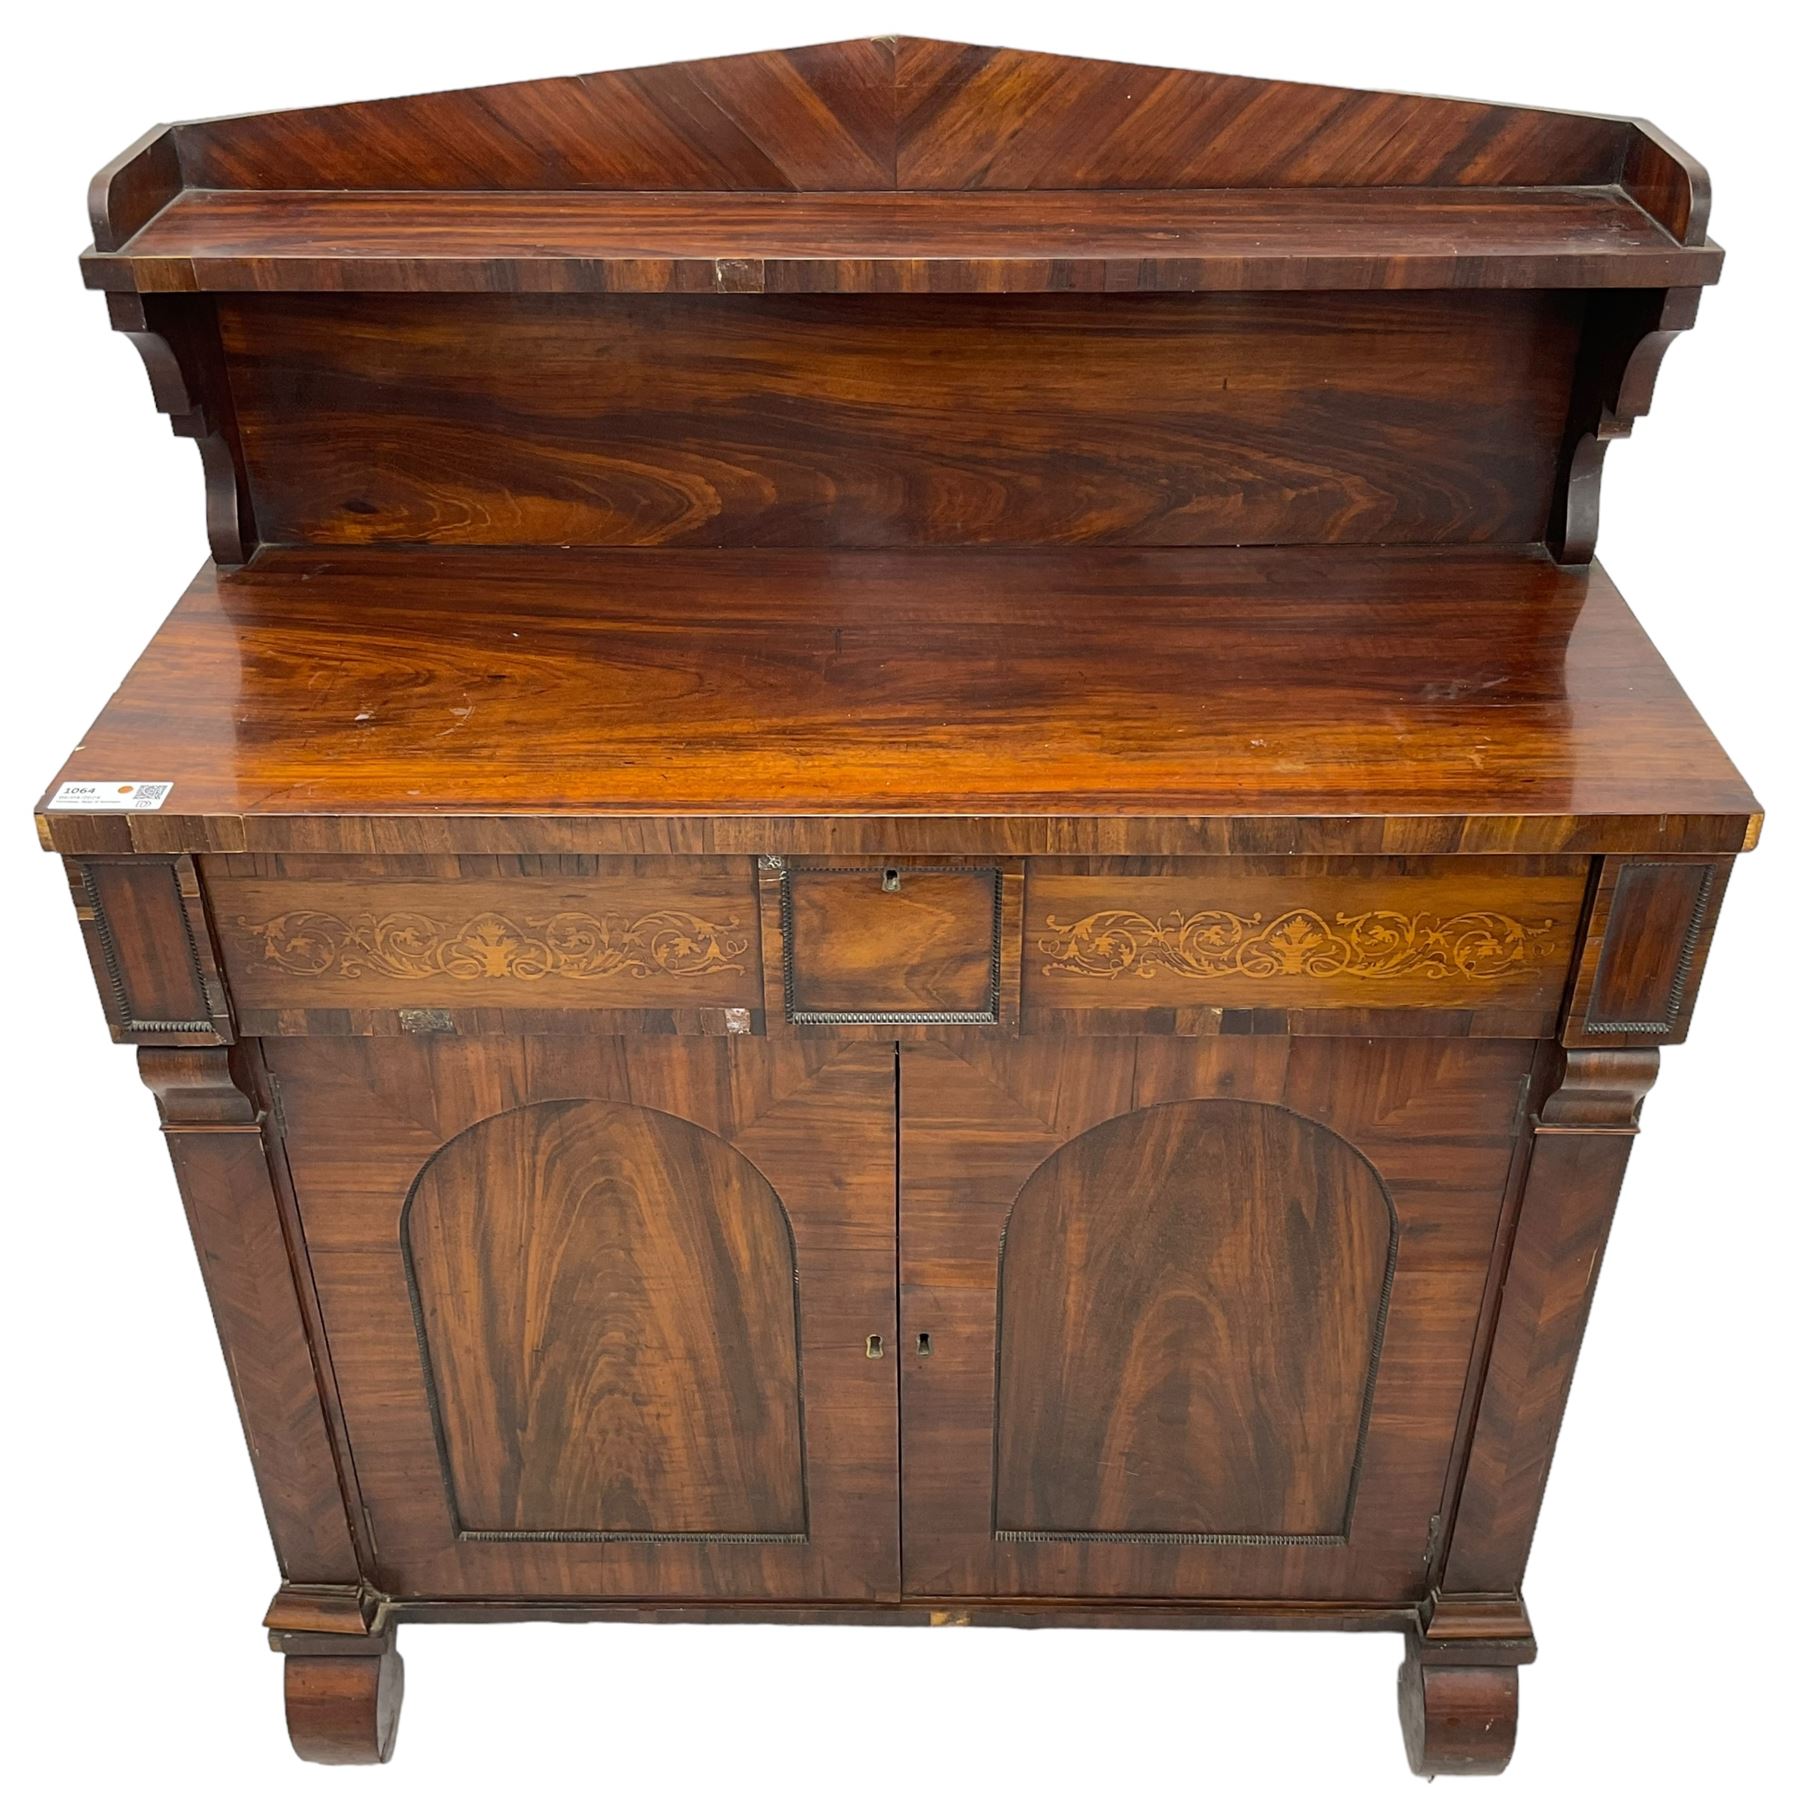 Early 19th century rosewood chiffonier - Image 2 of 7